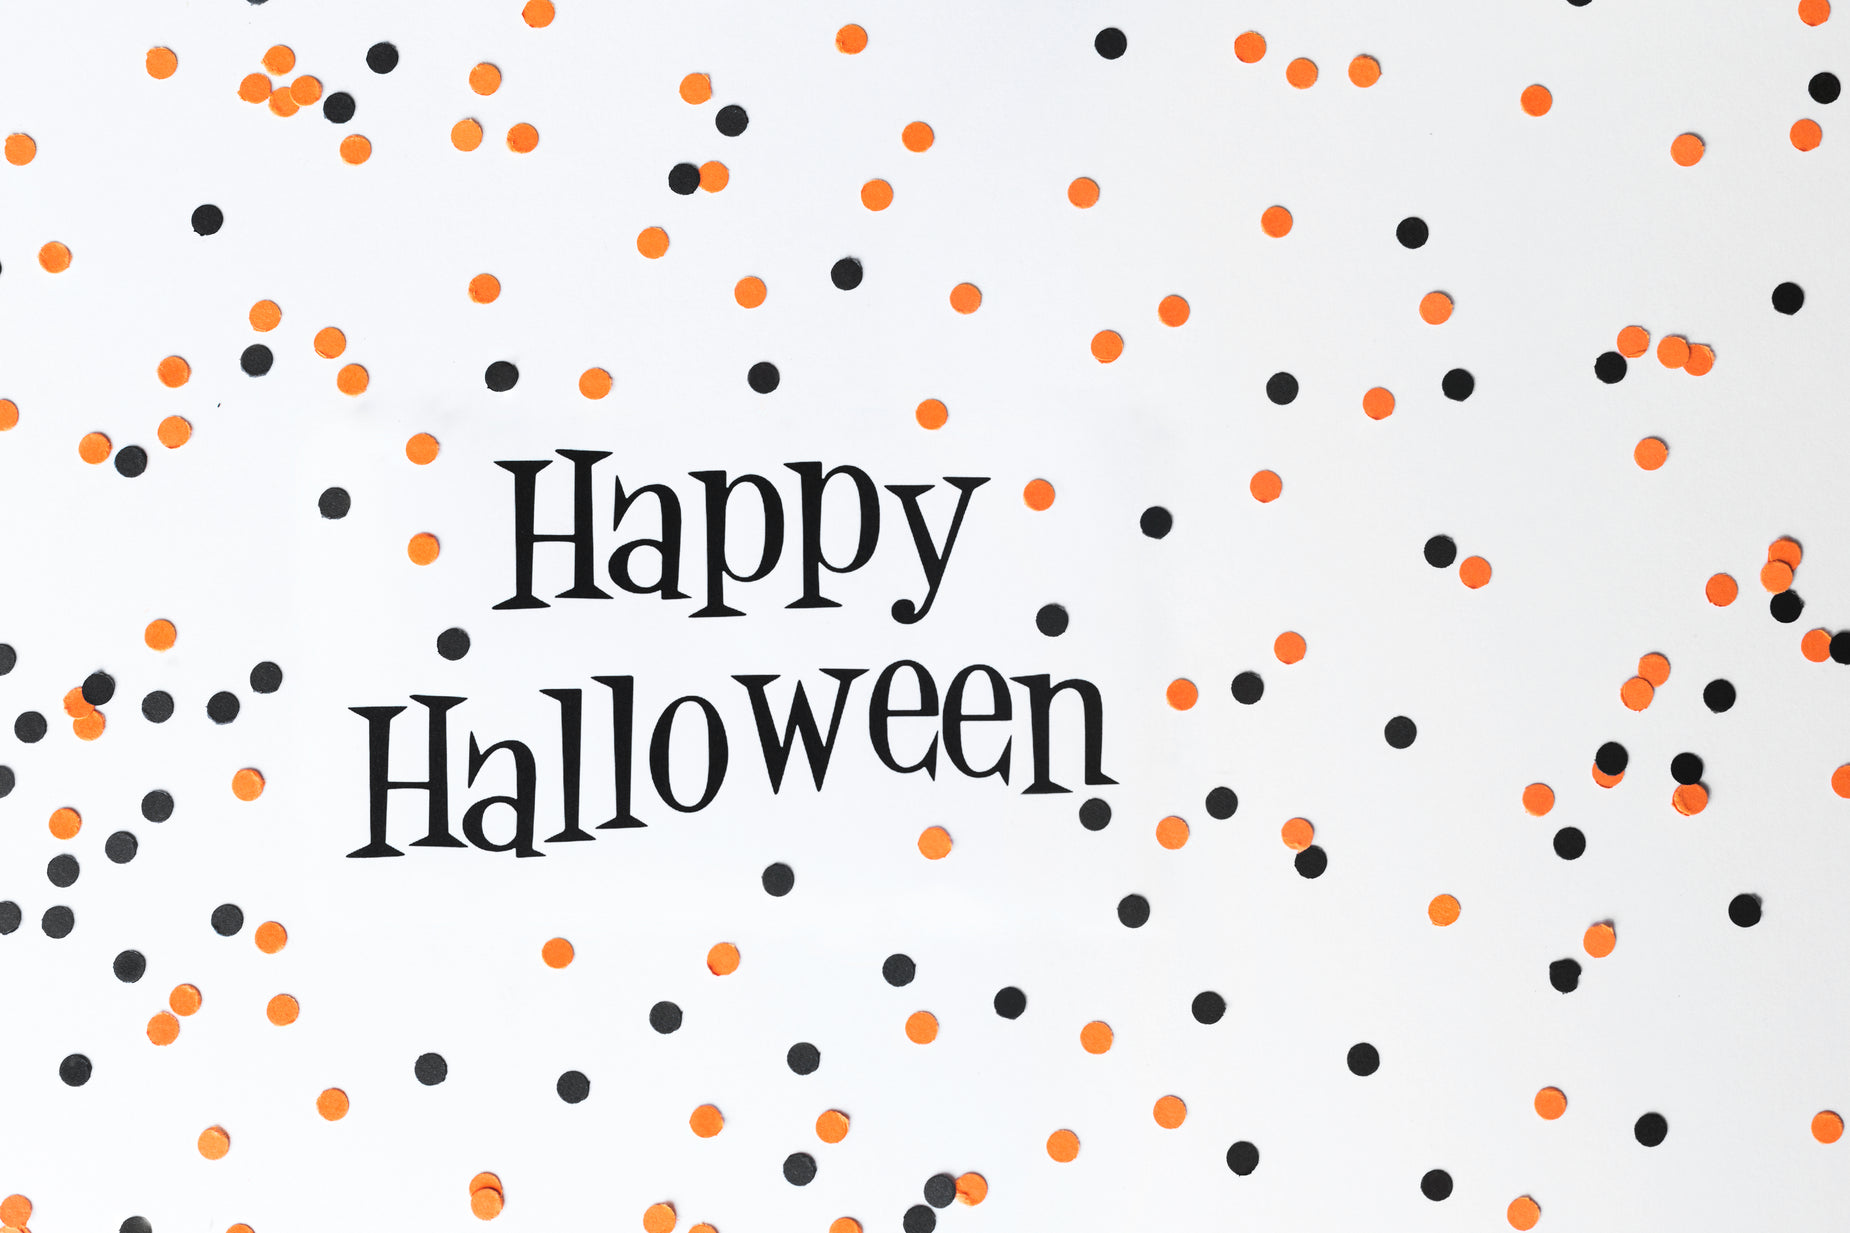 happy halloween with orange black and white dots and a sprinkled text design